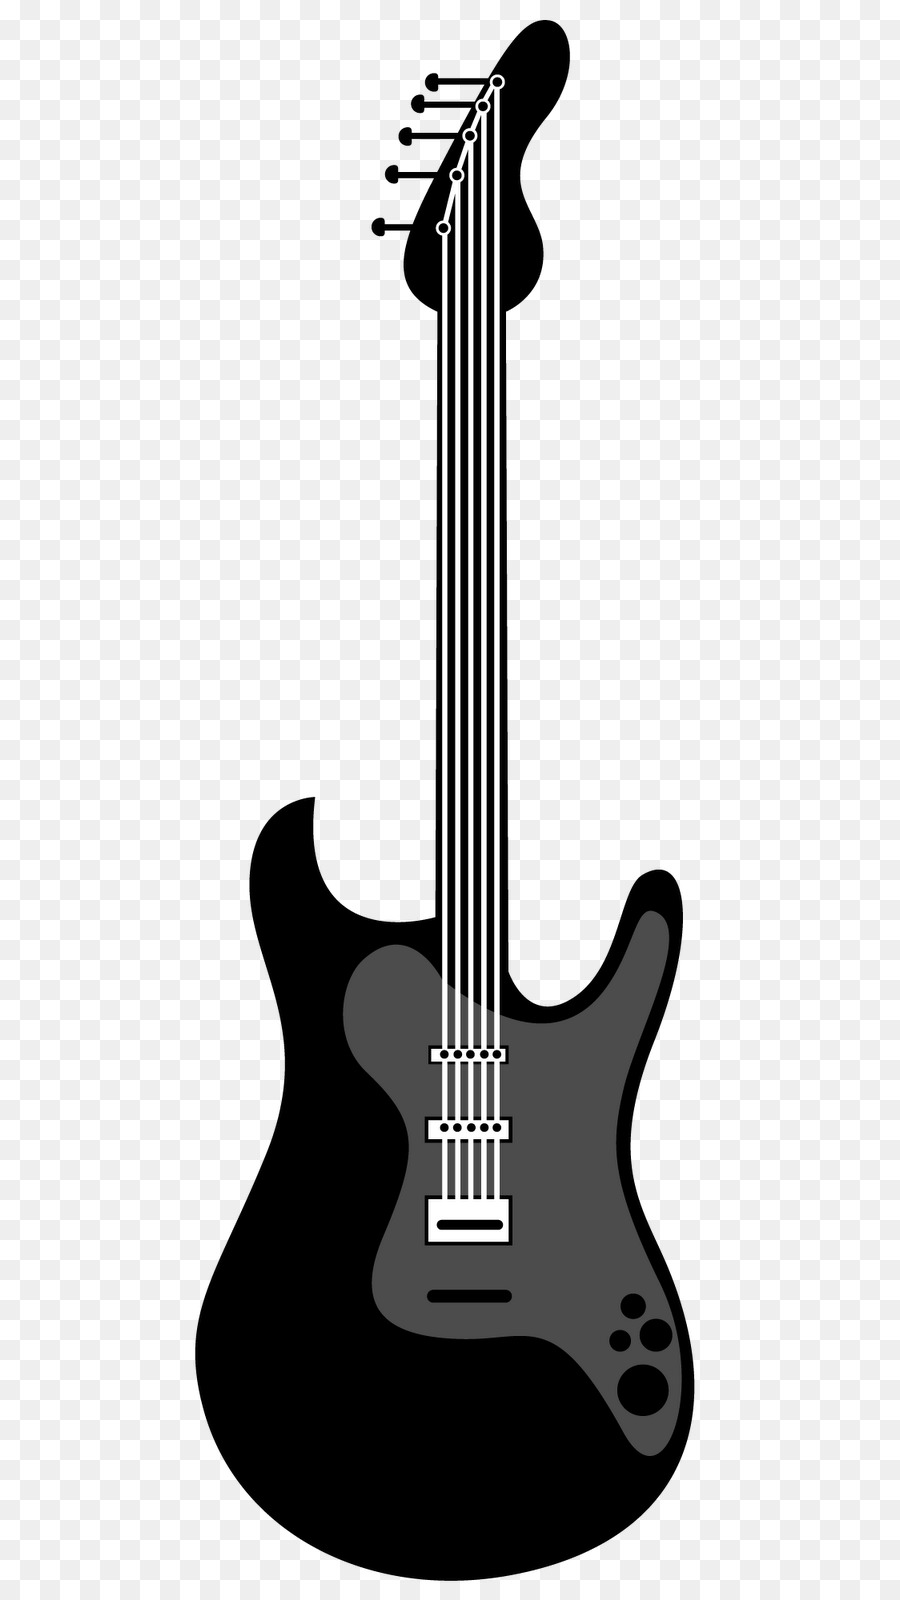 Electric guitar String Instruments Musical Instruments Acoustic guitar - guitar vector png download - 626*1600 - Free Transparent  png Download.